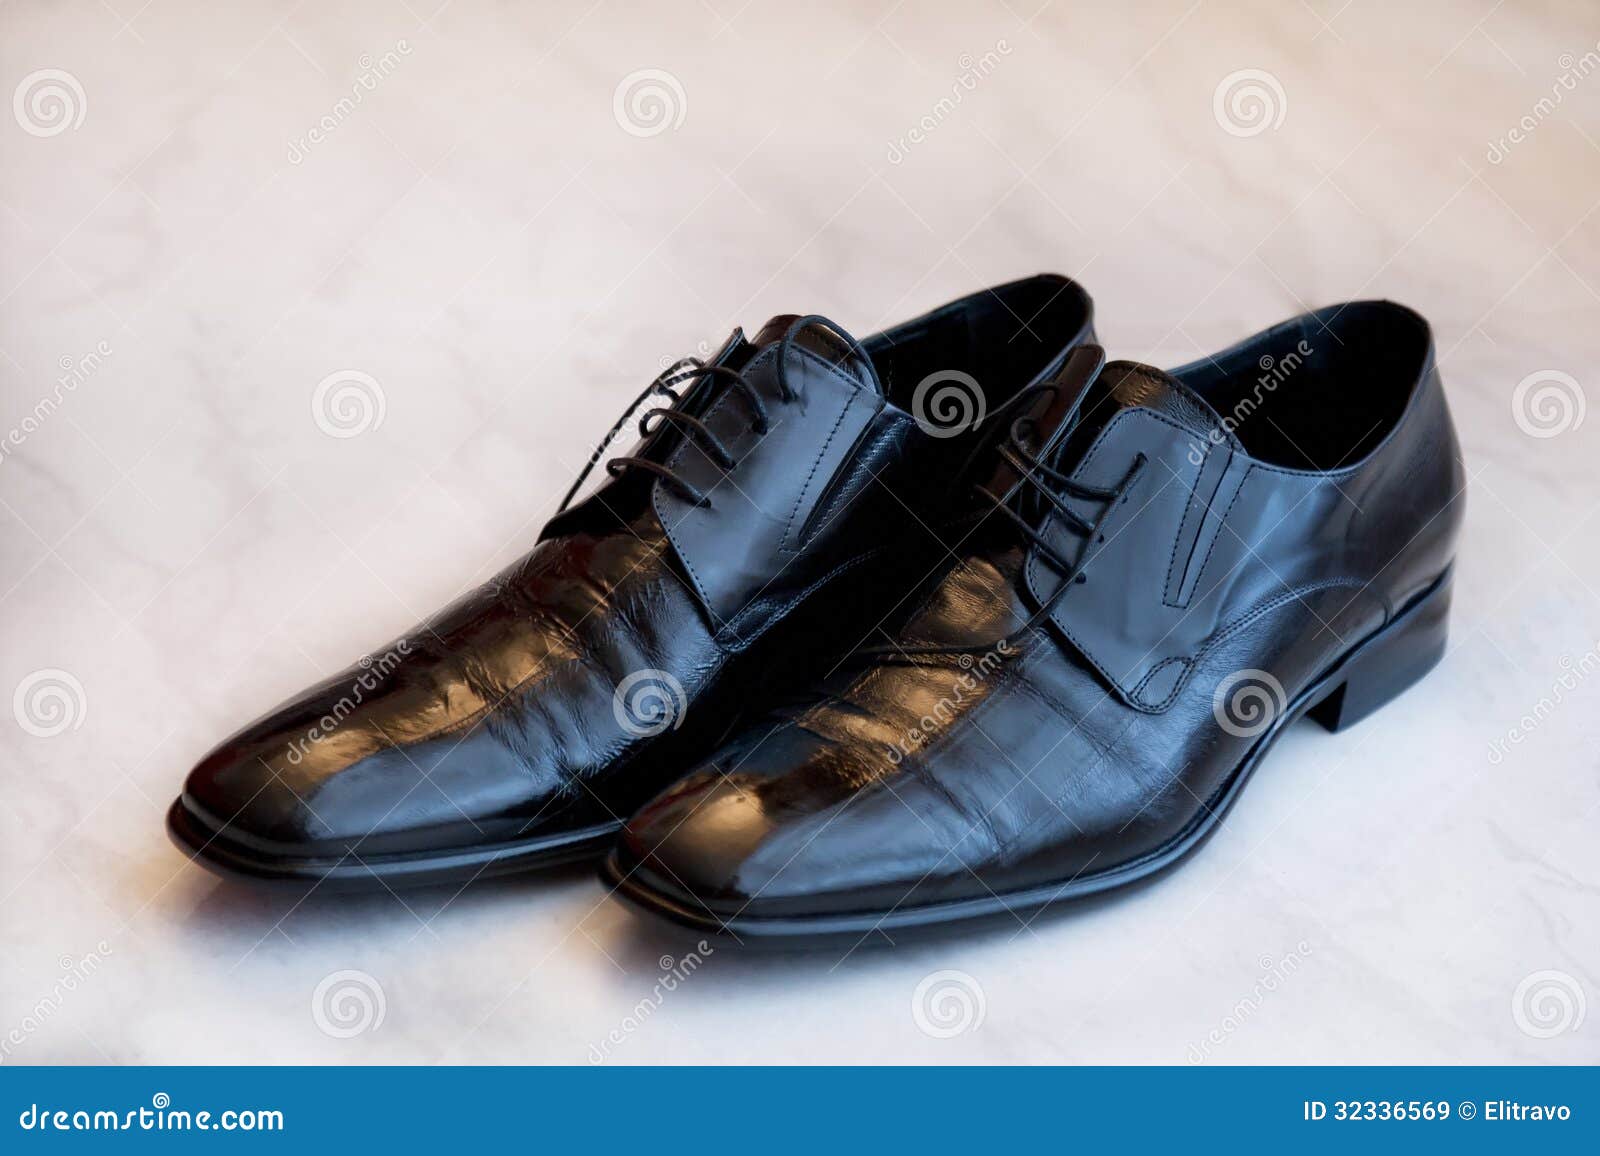 Groom shoes stock image. Image of male, groom, shoes - 32336569